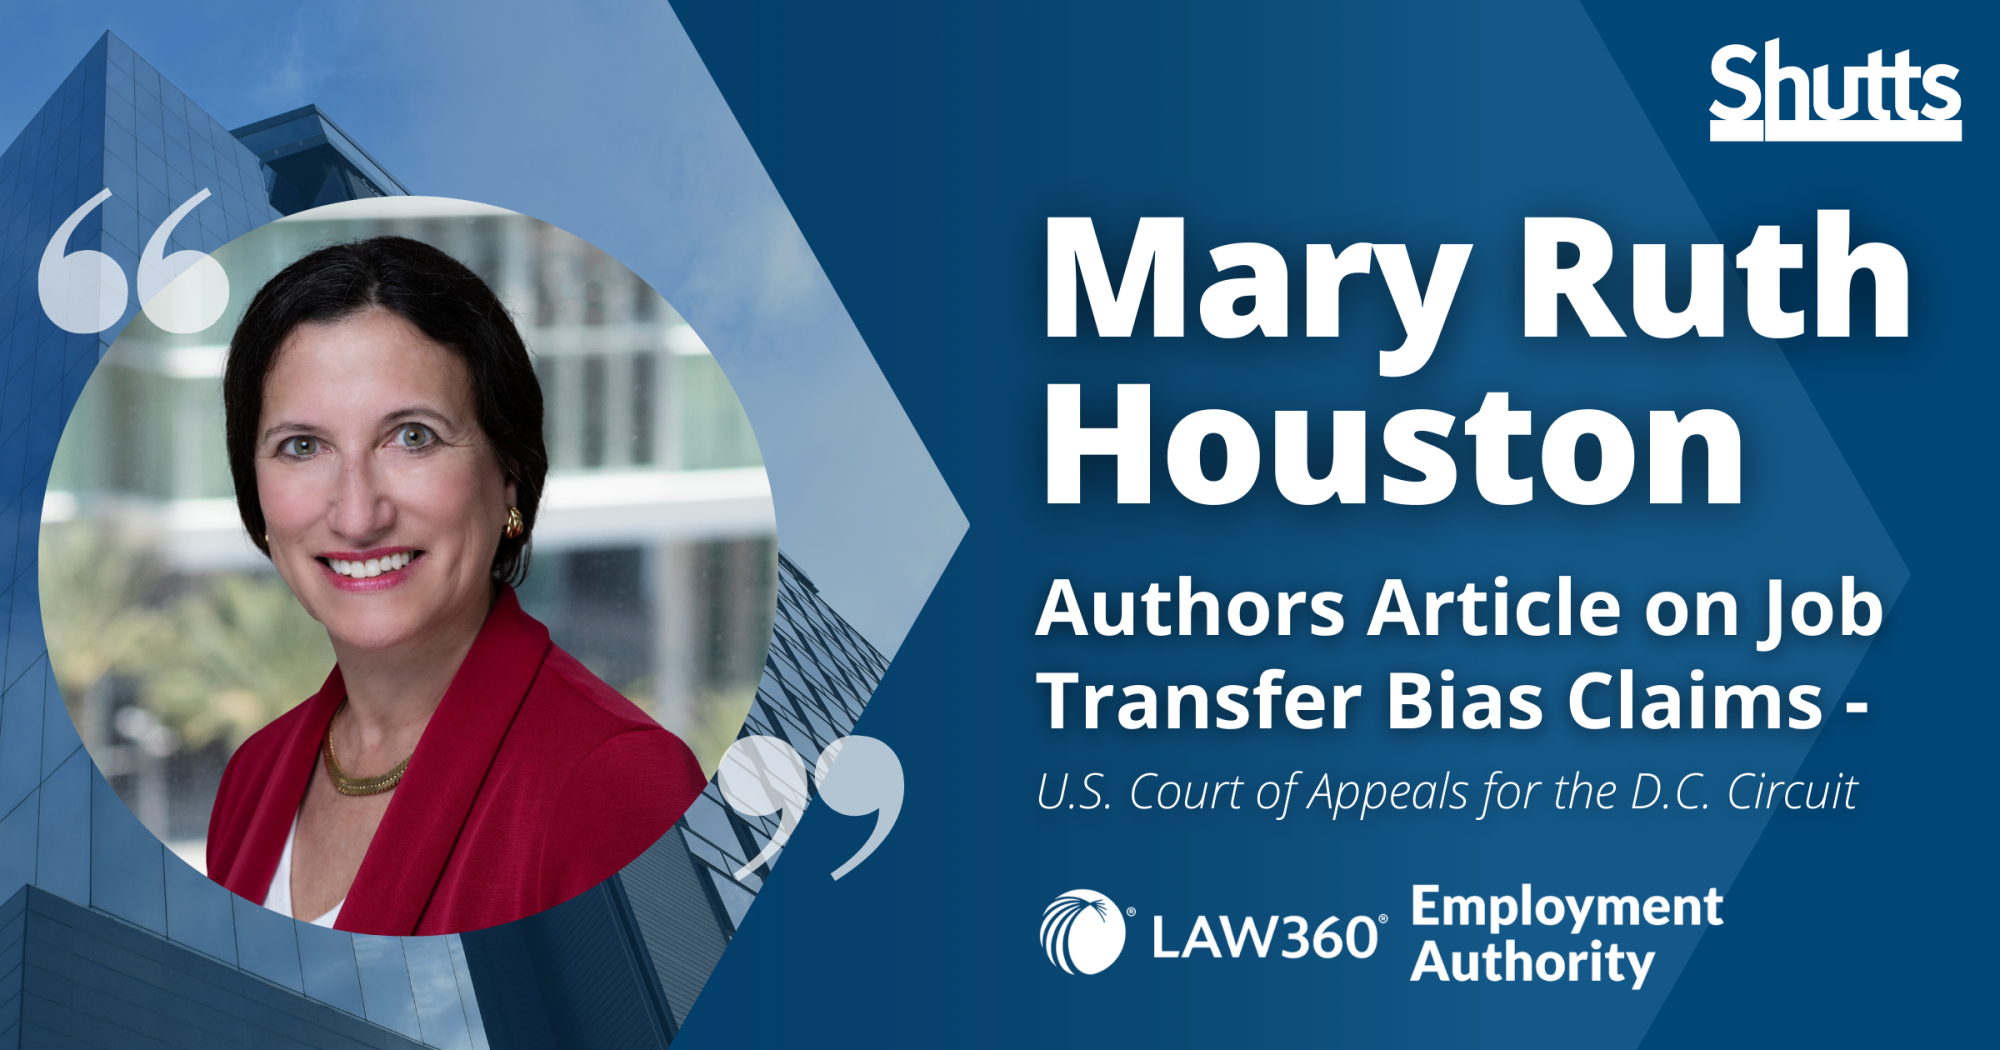 Mary Ruth Houston Authors Law360 Employment Authority Article on Job Transfer Bias Claims